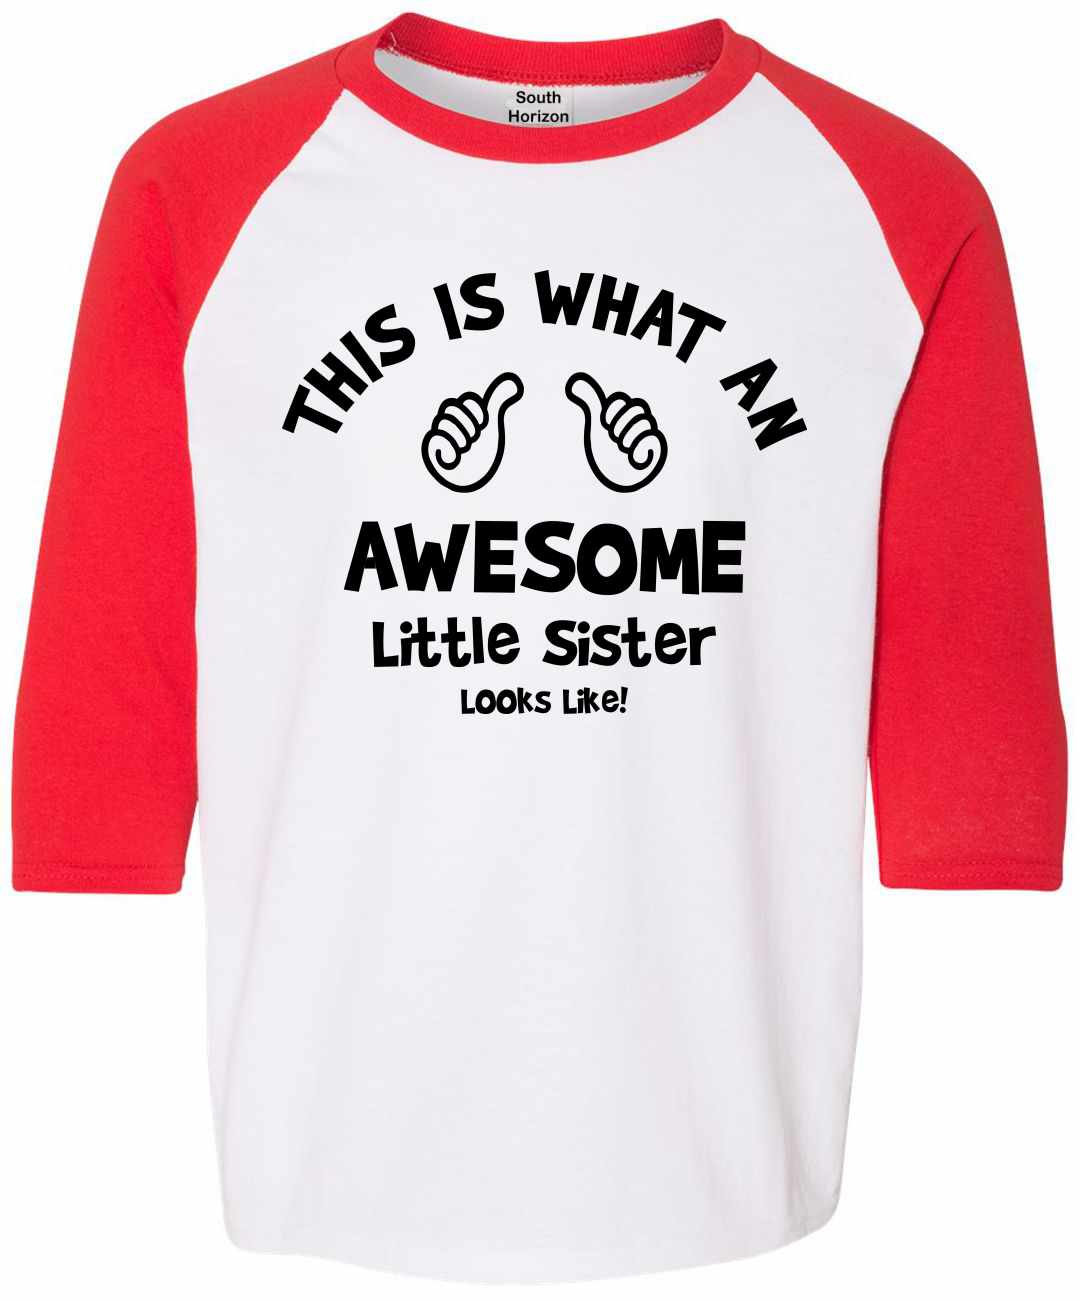 This is What an AWESOME LITTLE SISTER Looks Like on Youth Baseball Shirt (#1037-212)